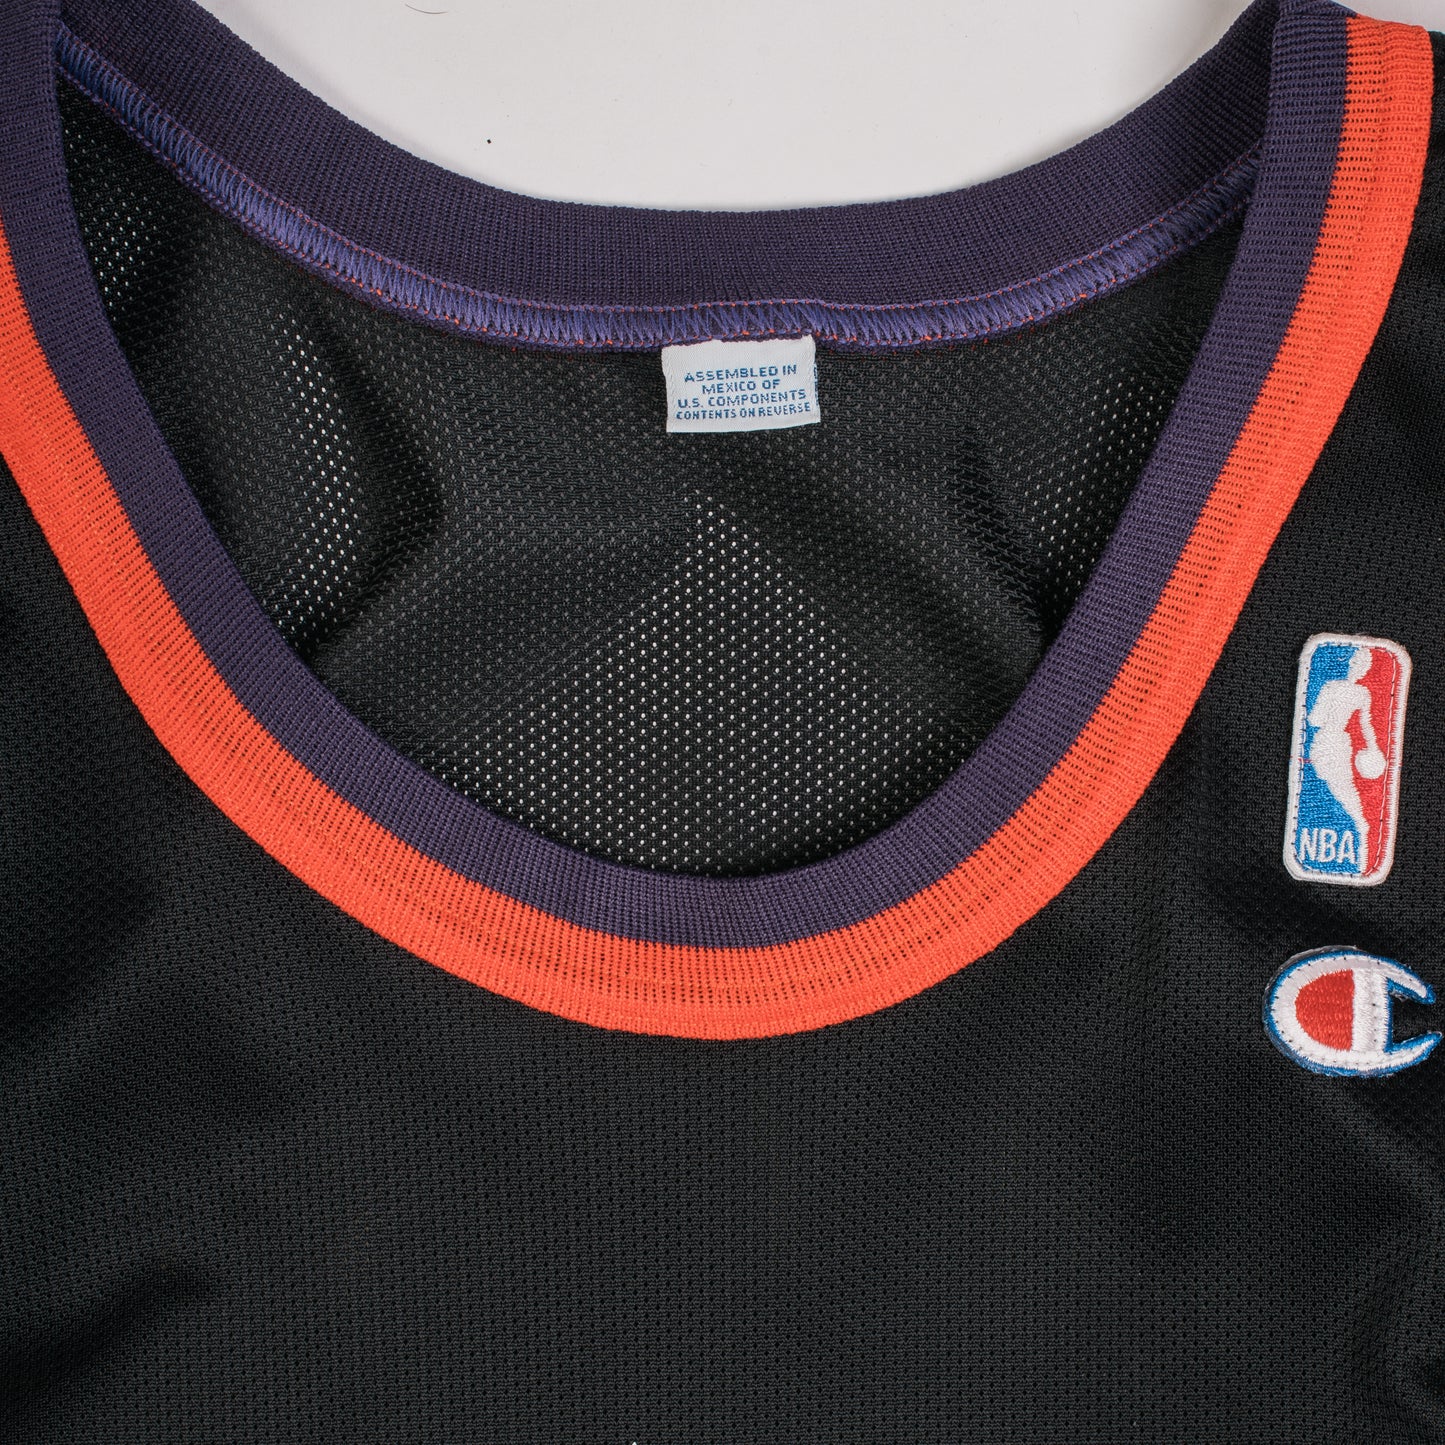 Vintage 90’s Fury Of Five Champion Basketball Jersey